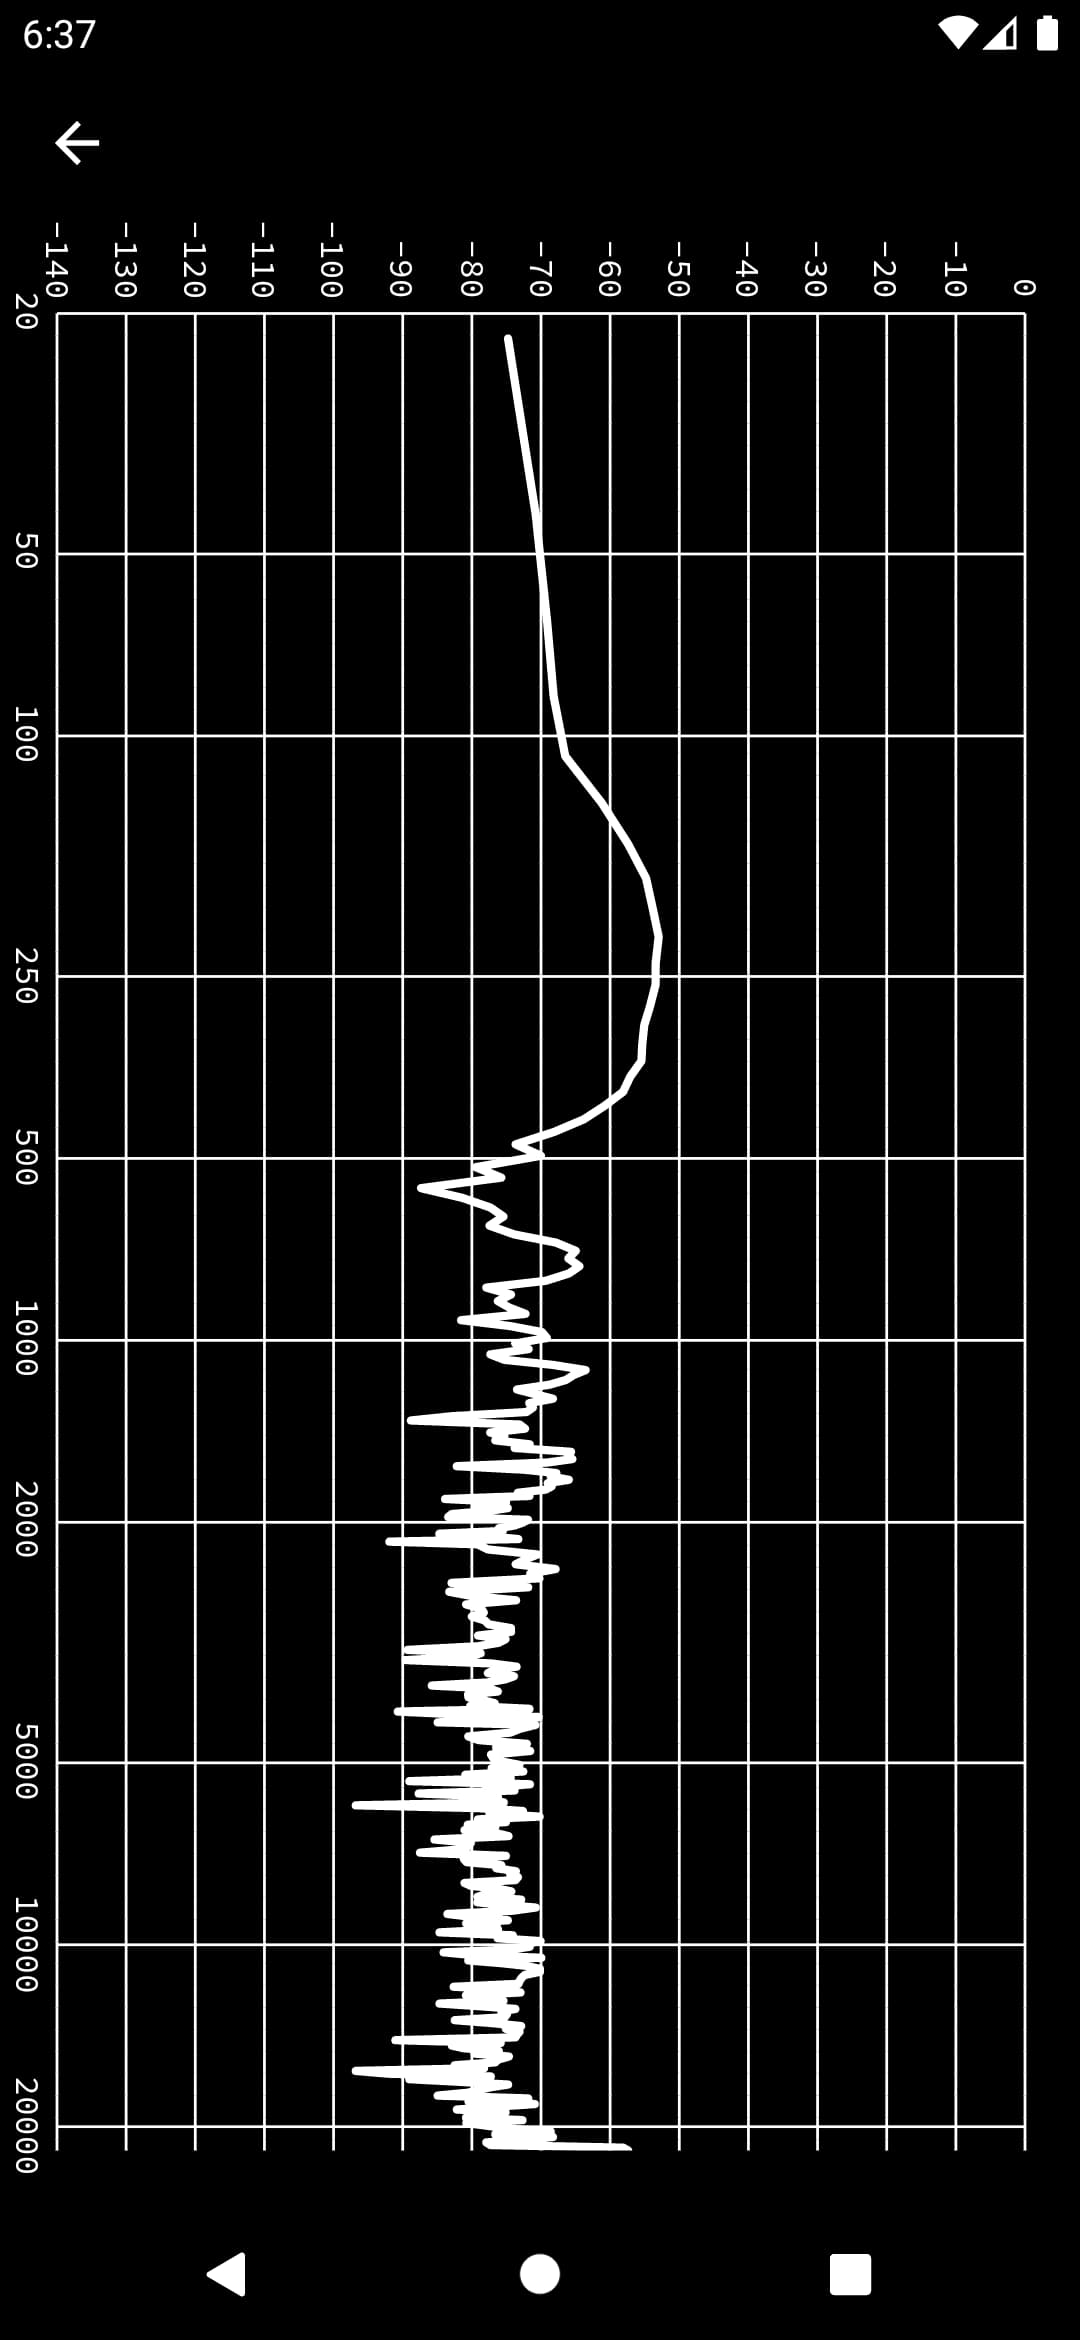 a screenshot of the frequency interface, showing a chart of current volumes of frequencies